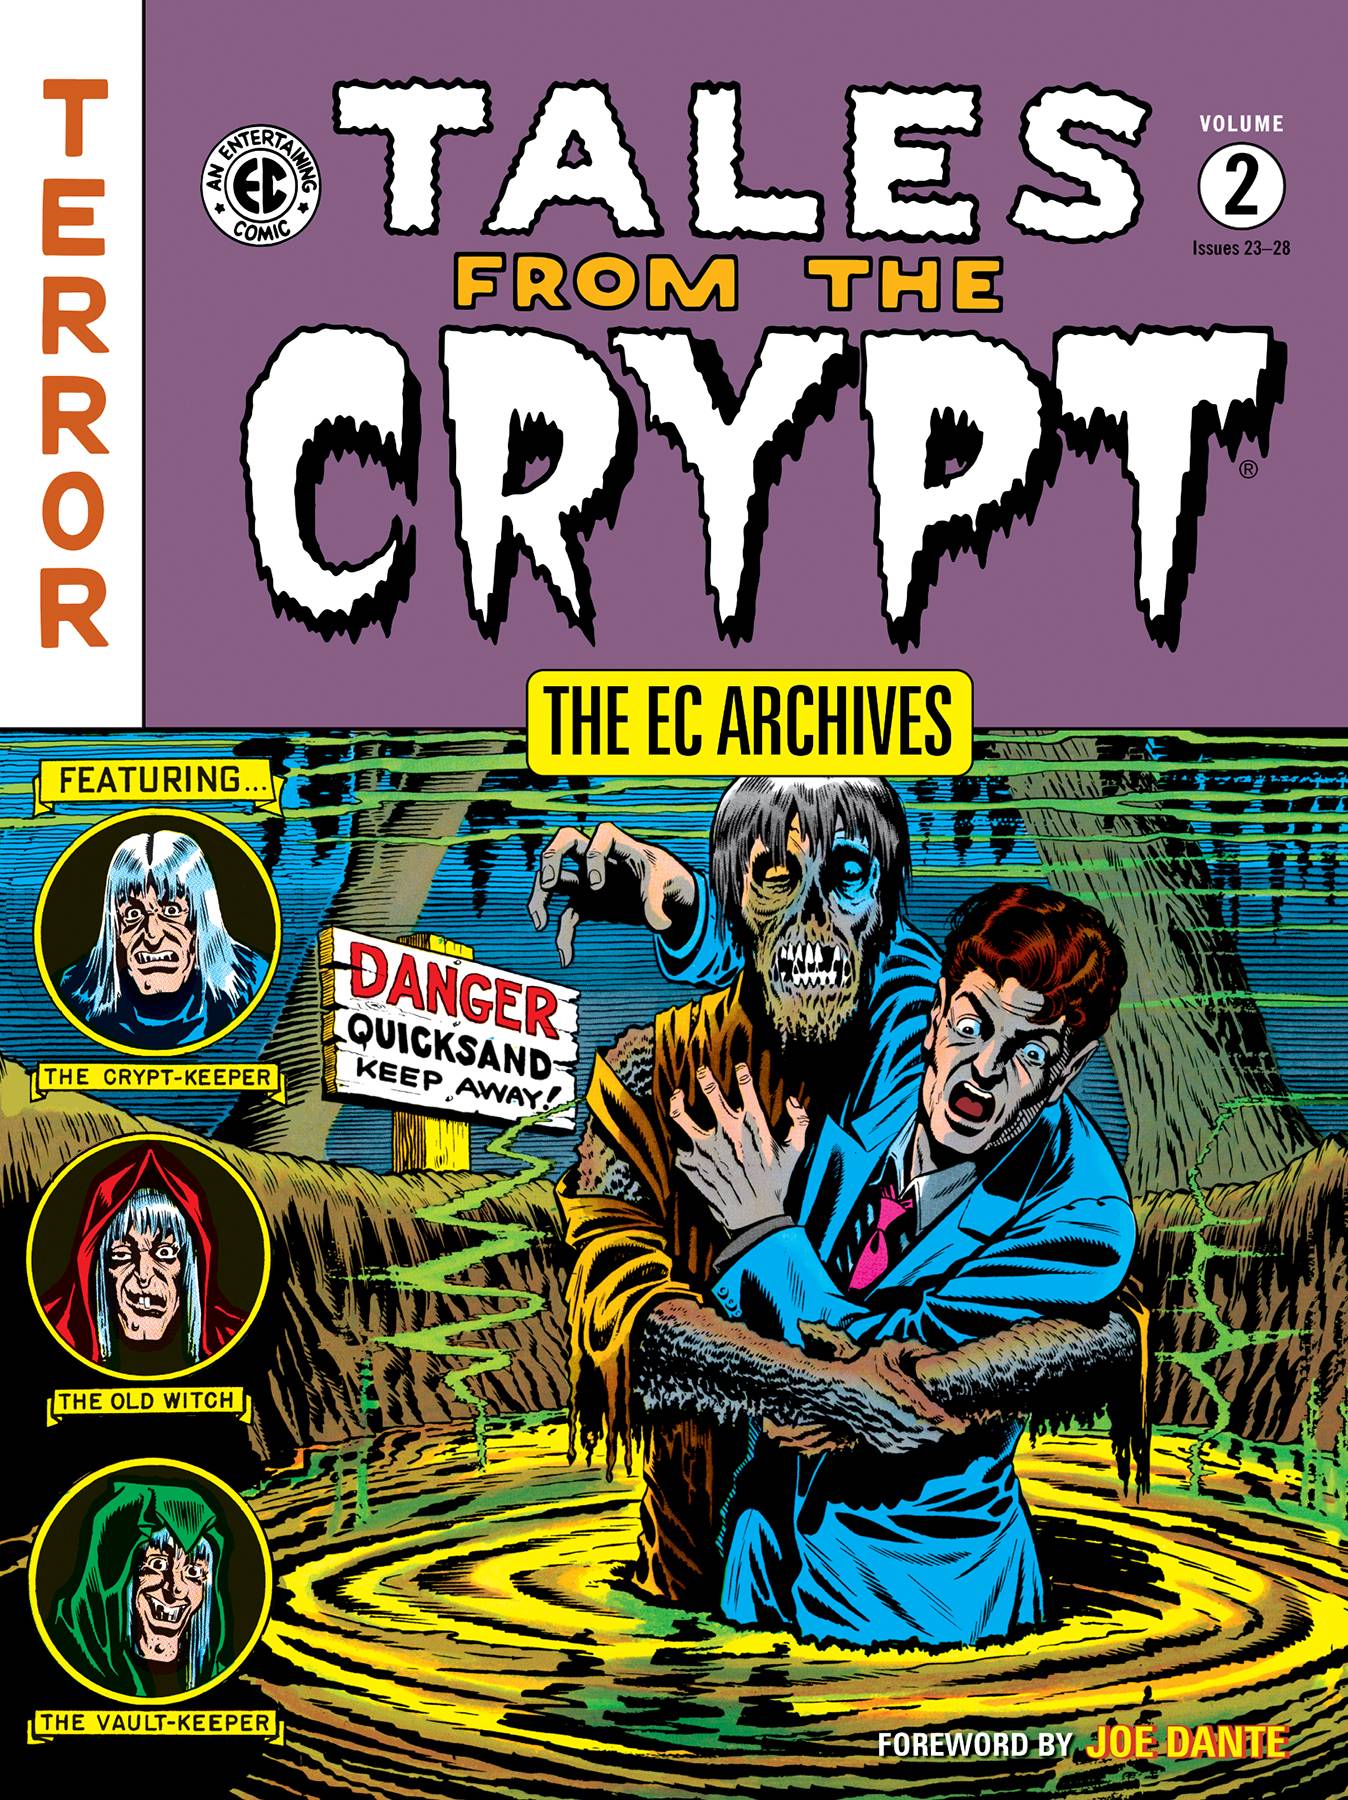 EC ARCHIVES TALES FROM CRYPT TP VOL 02